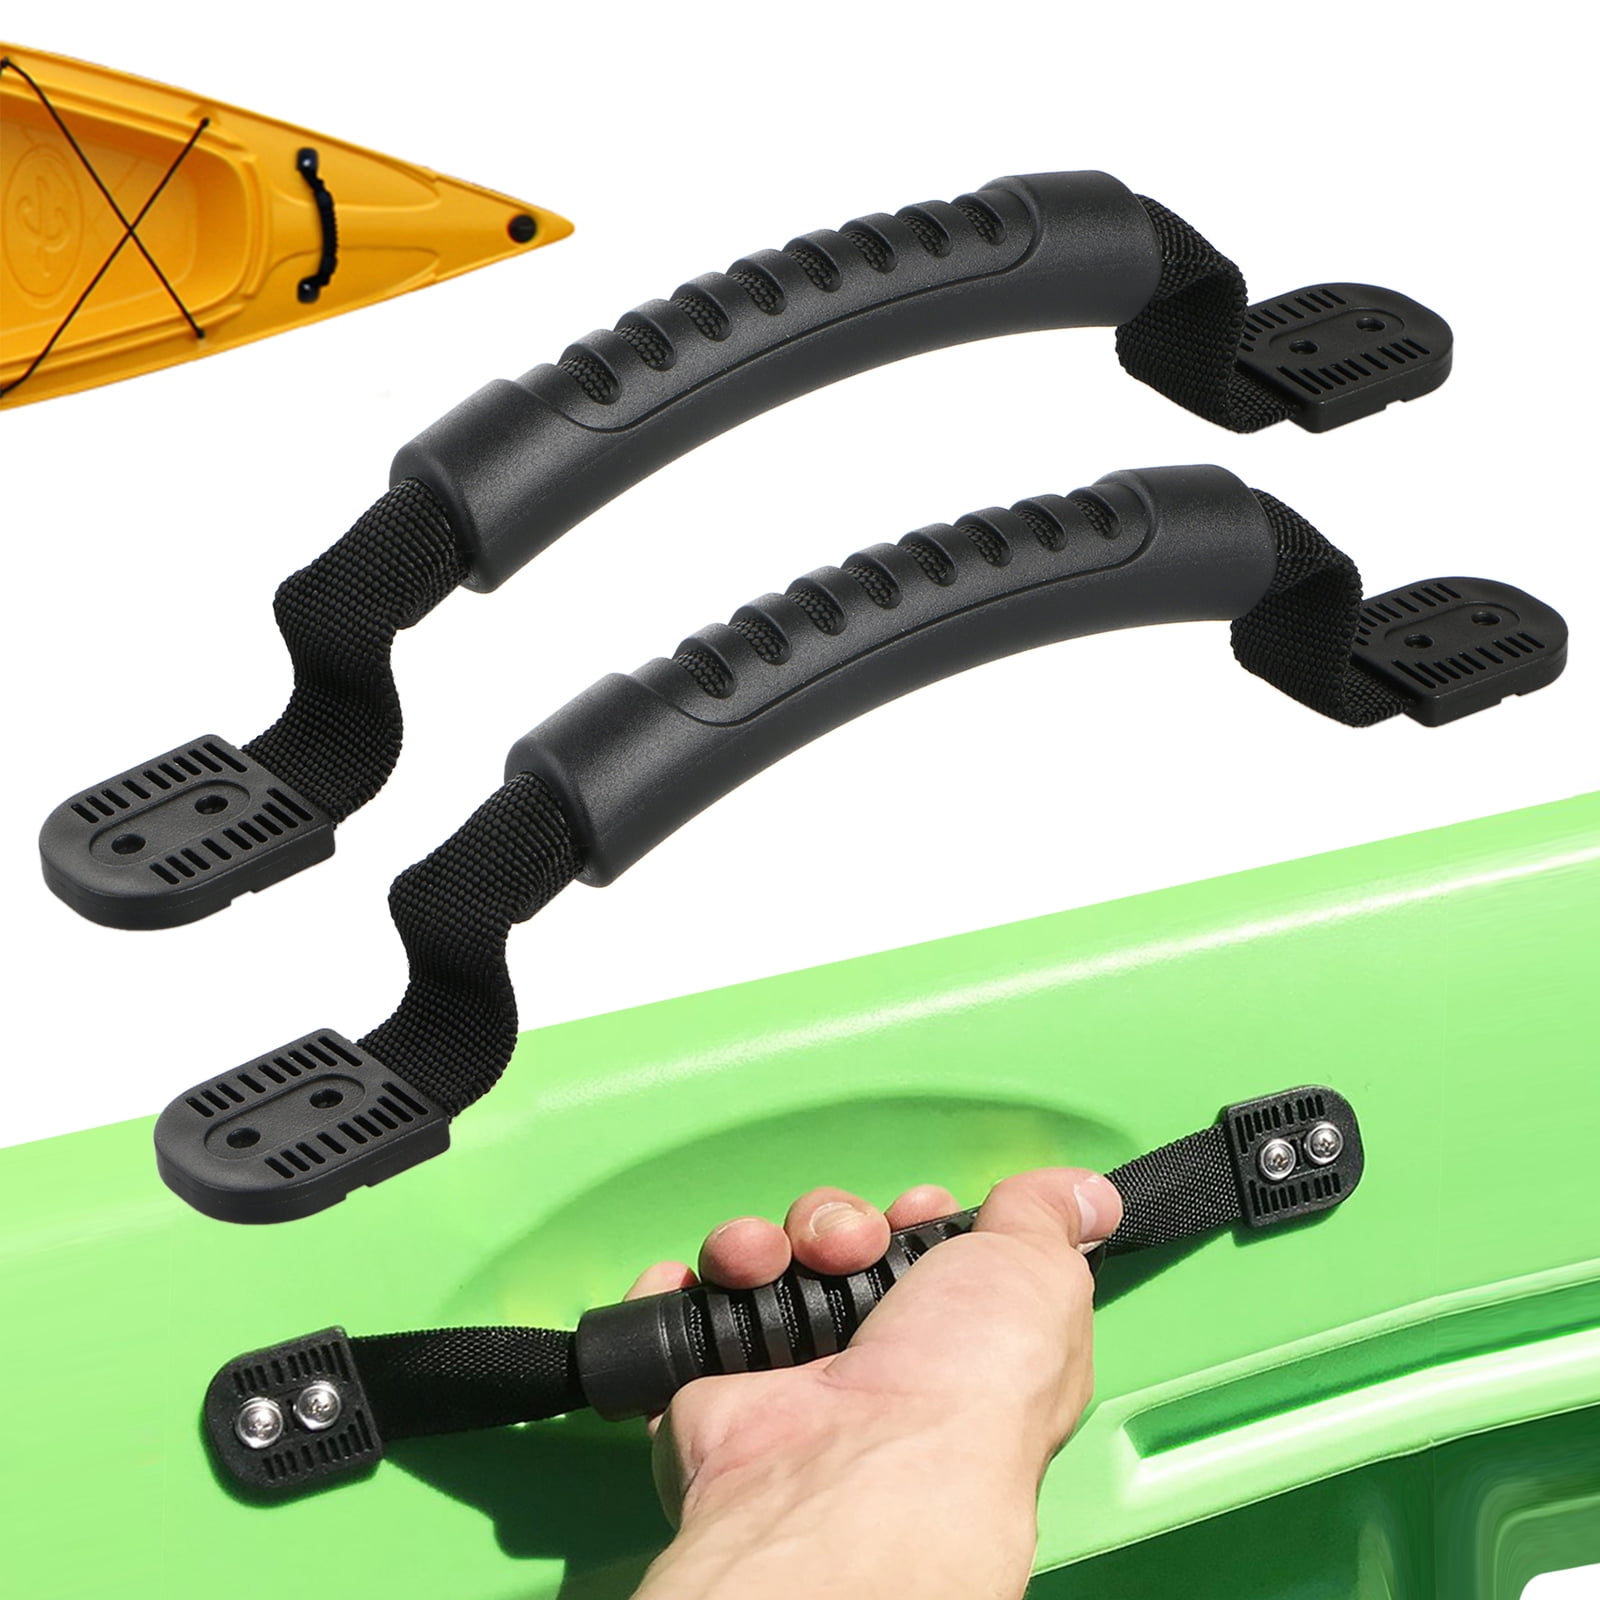 1-4x Boat Luggage Side Mount Carry Handles Fitting for Kayak Canoe Boat US SHIP 